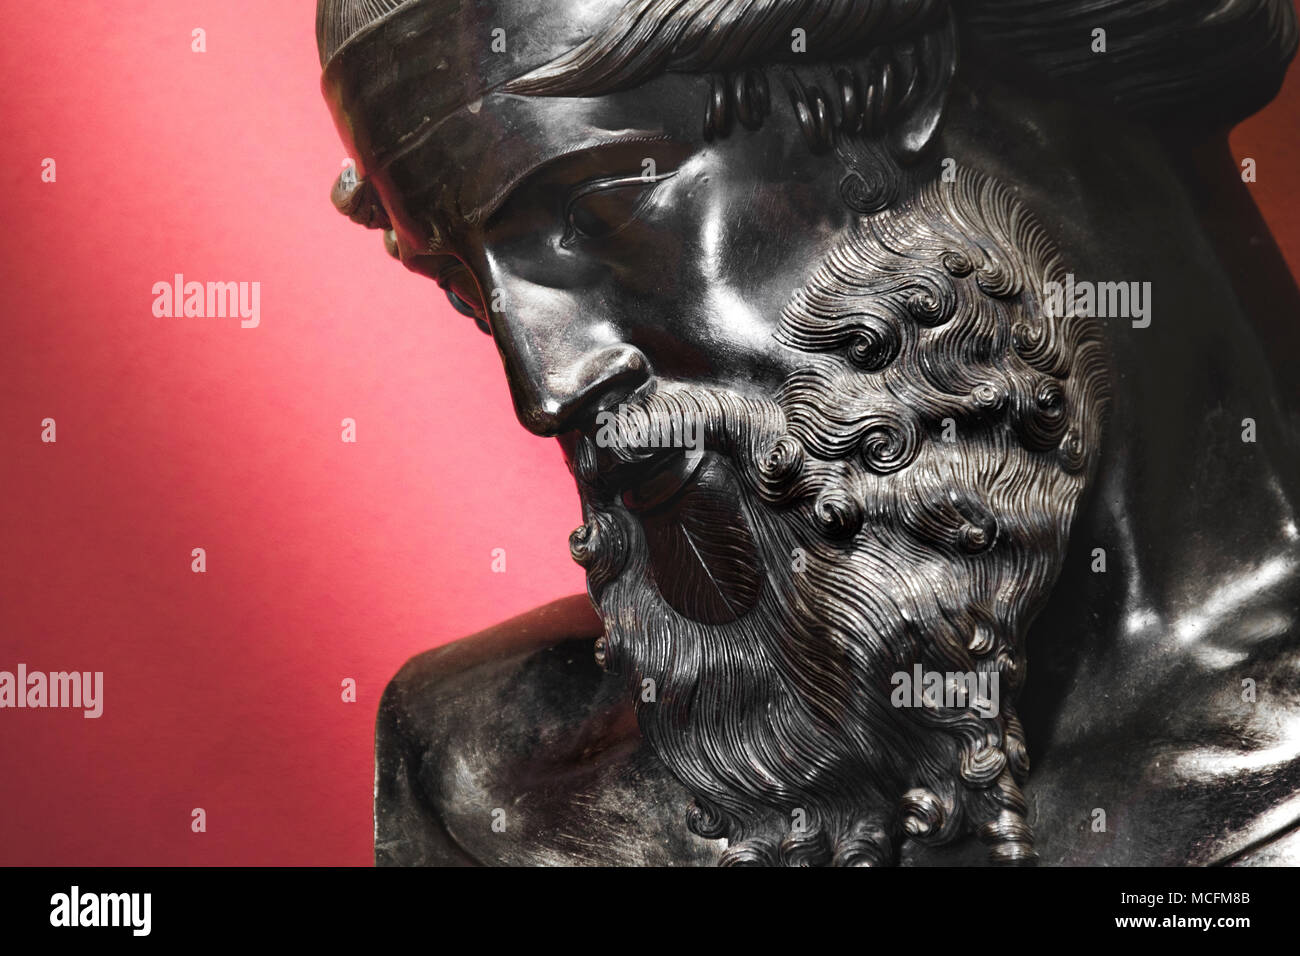 Black statue of bearded man face portrait red background Stock Photo